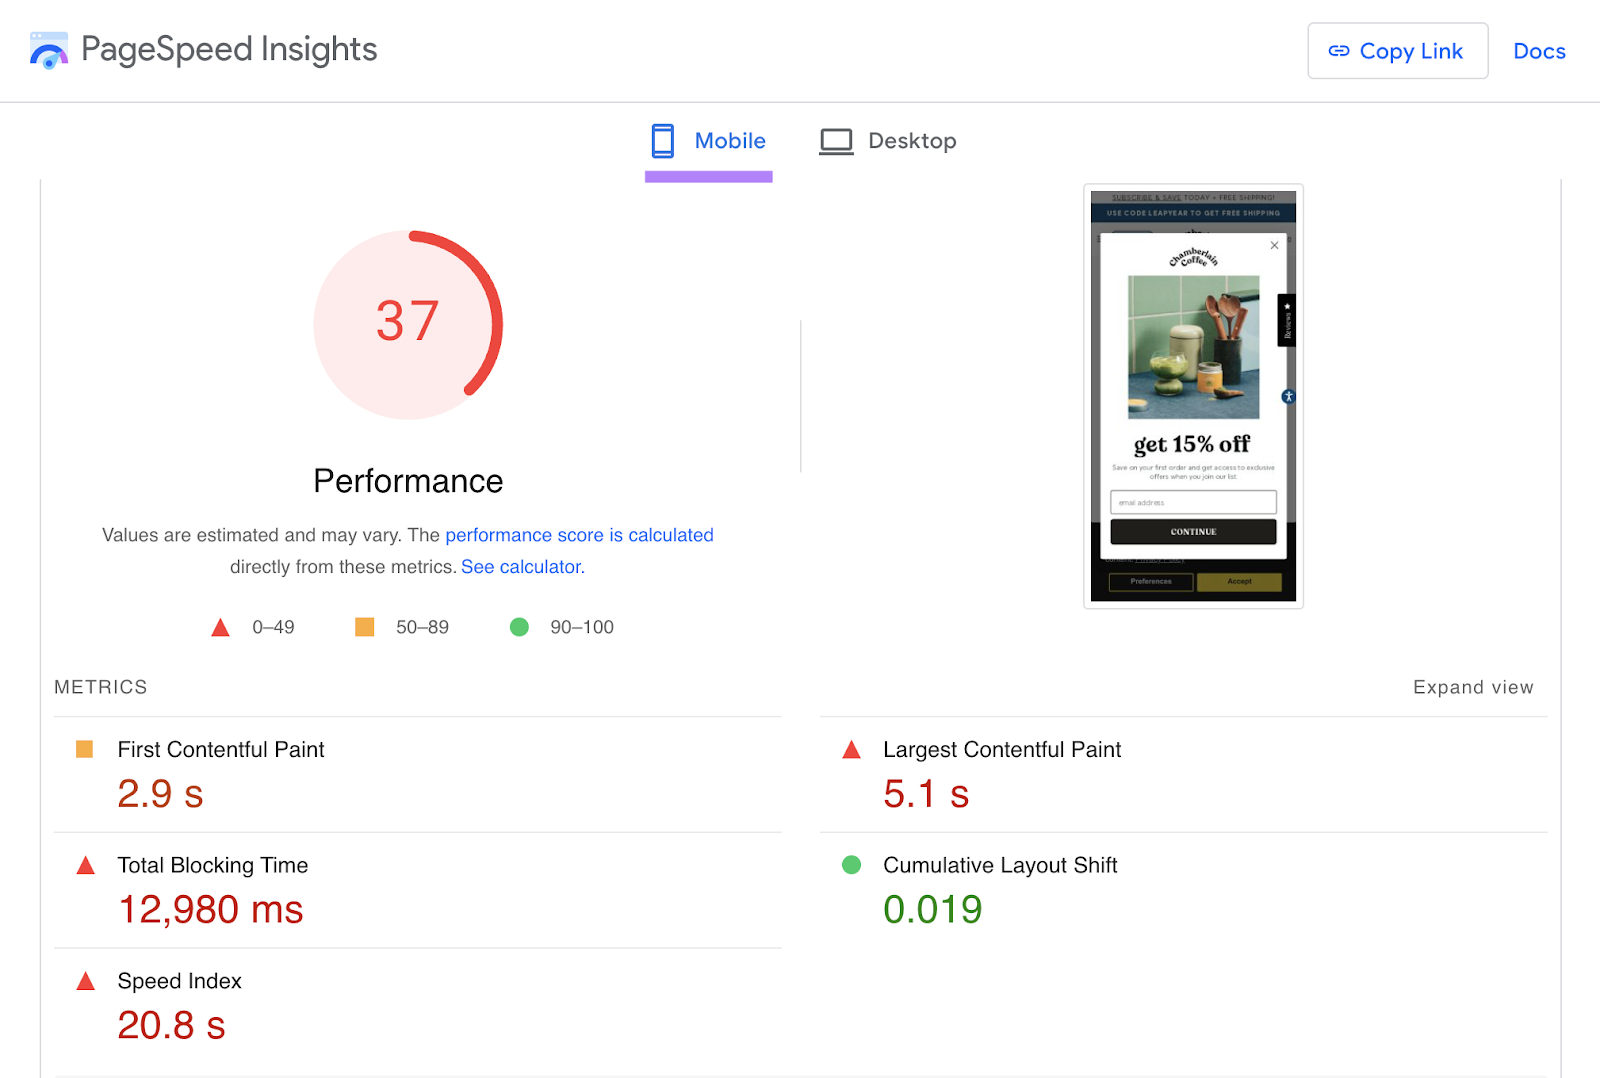 Performance people     shown for mobile successful  PageSpeed Insights tool